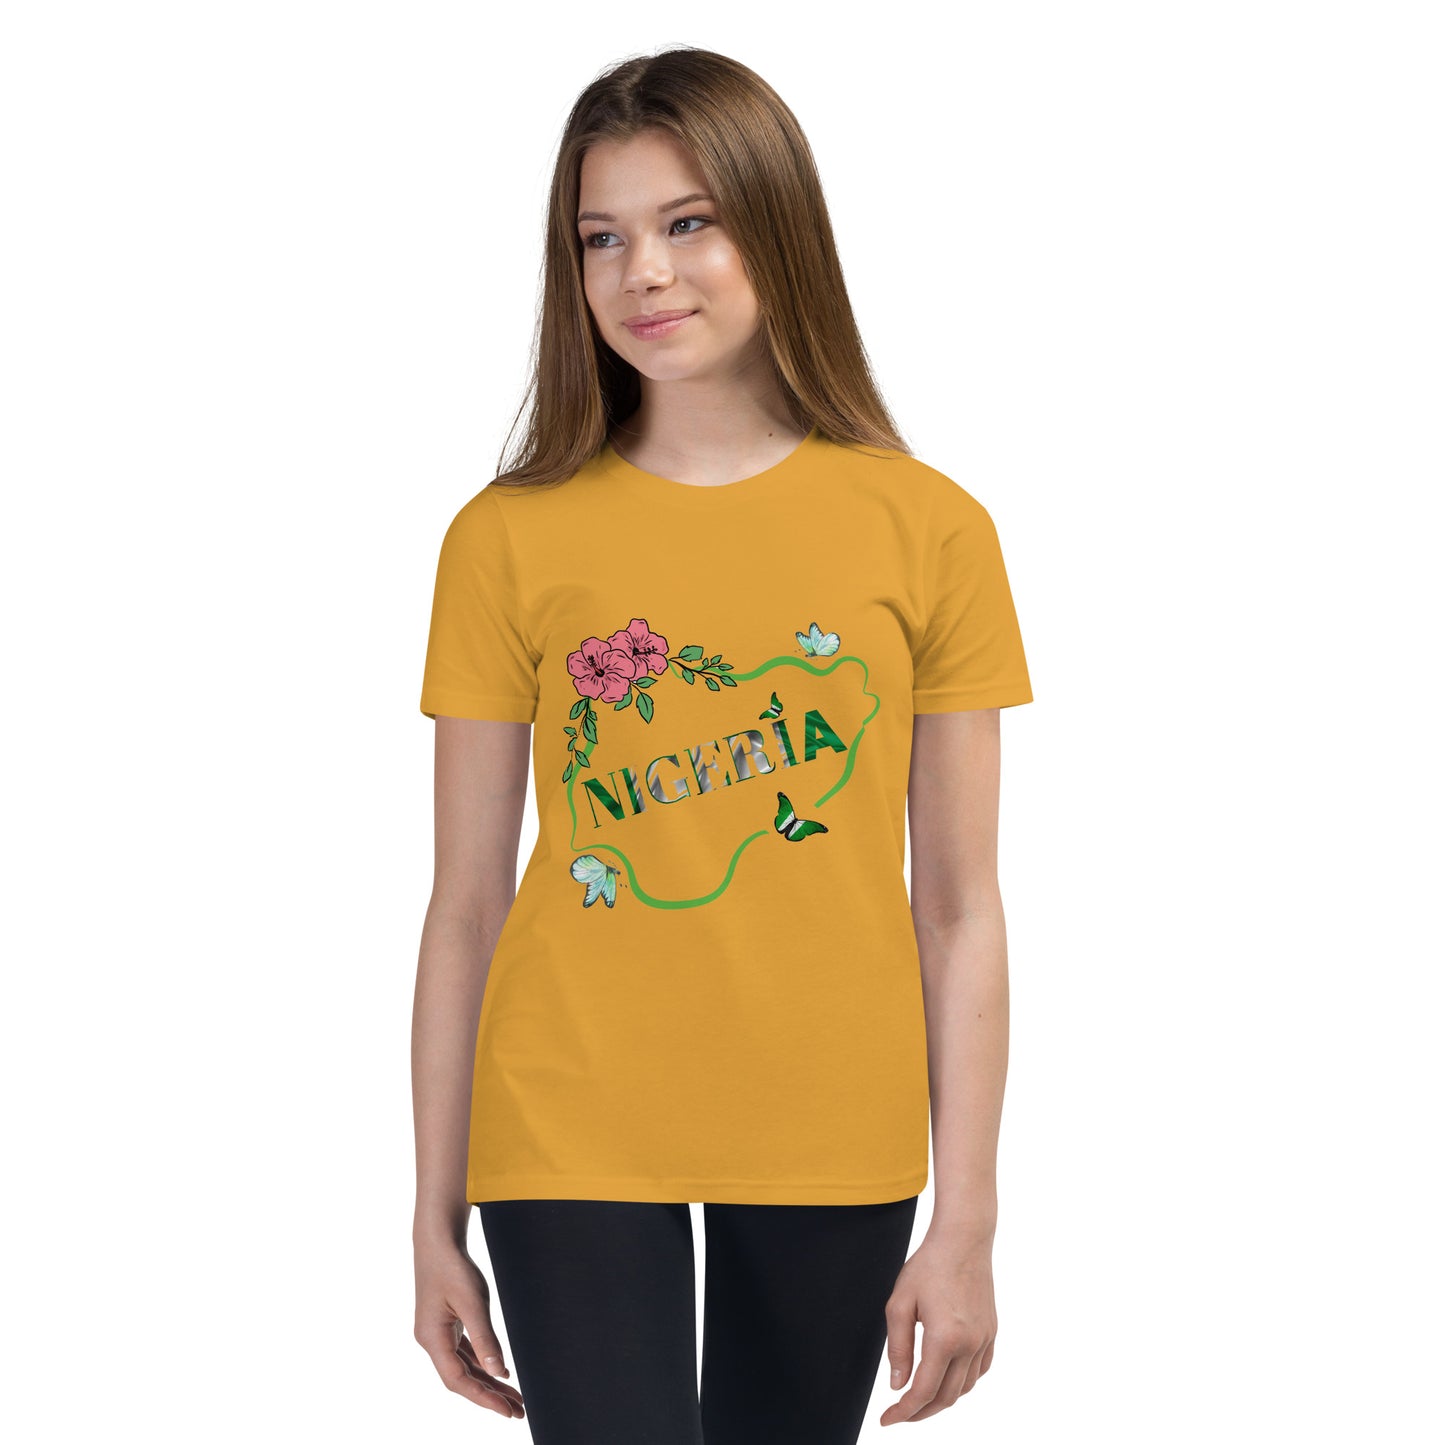 Nigeria Butterfly Youth Short Sleeve T-Shirt